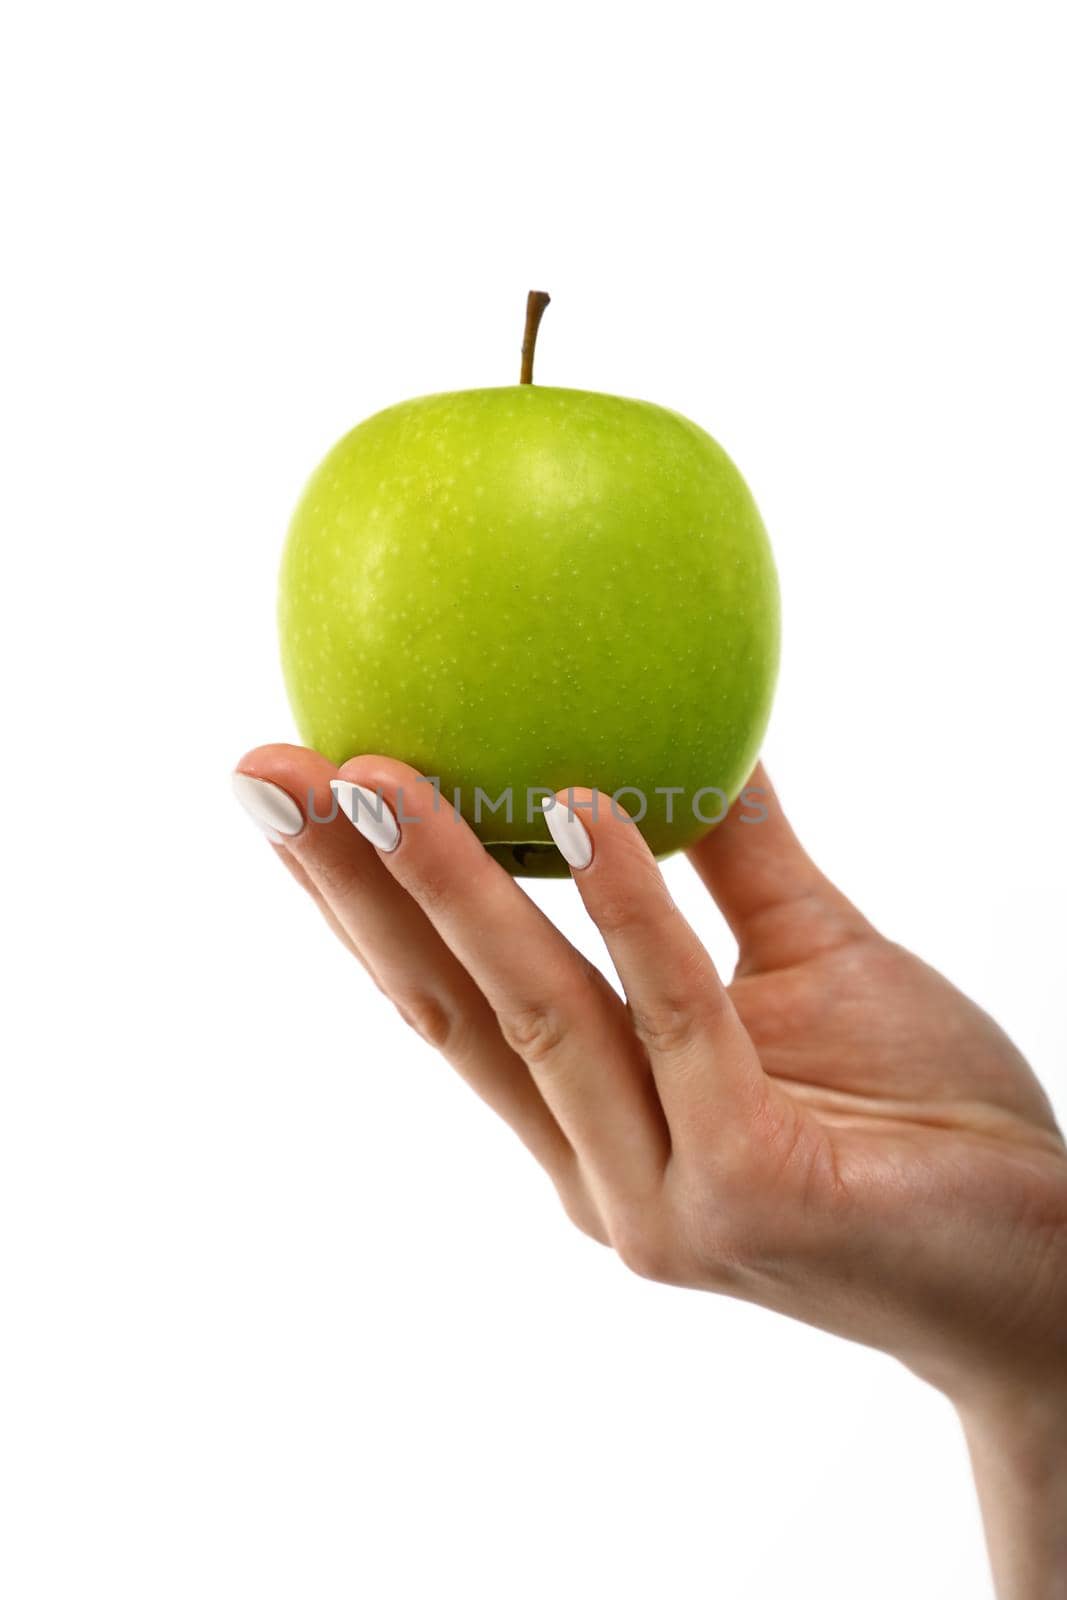 Close up Caucasian woman hand holding one fresh green apple isolated on white background, symbol of healthy eating concept, low angle, side view